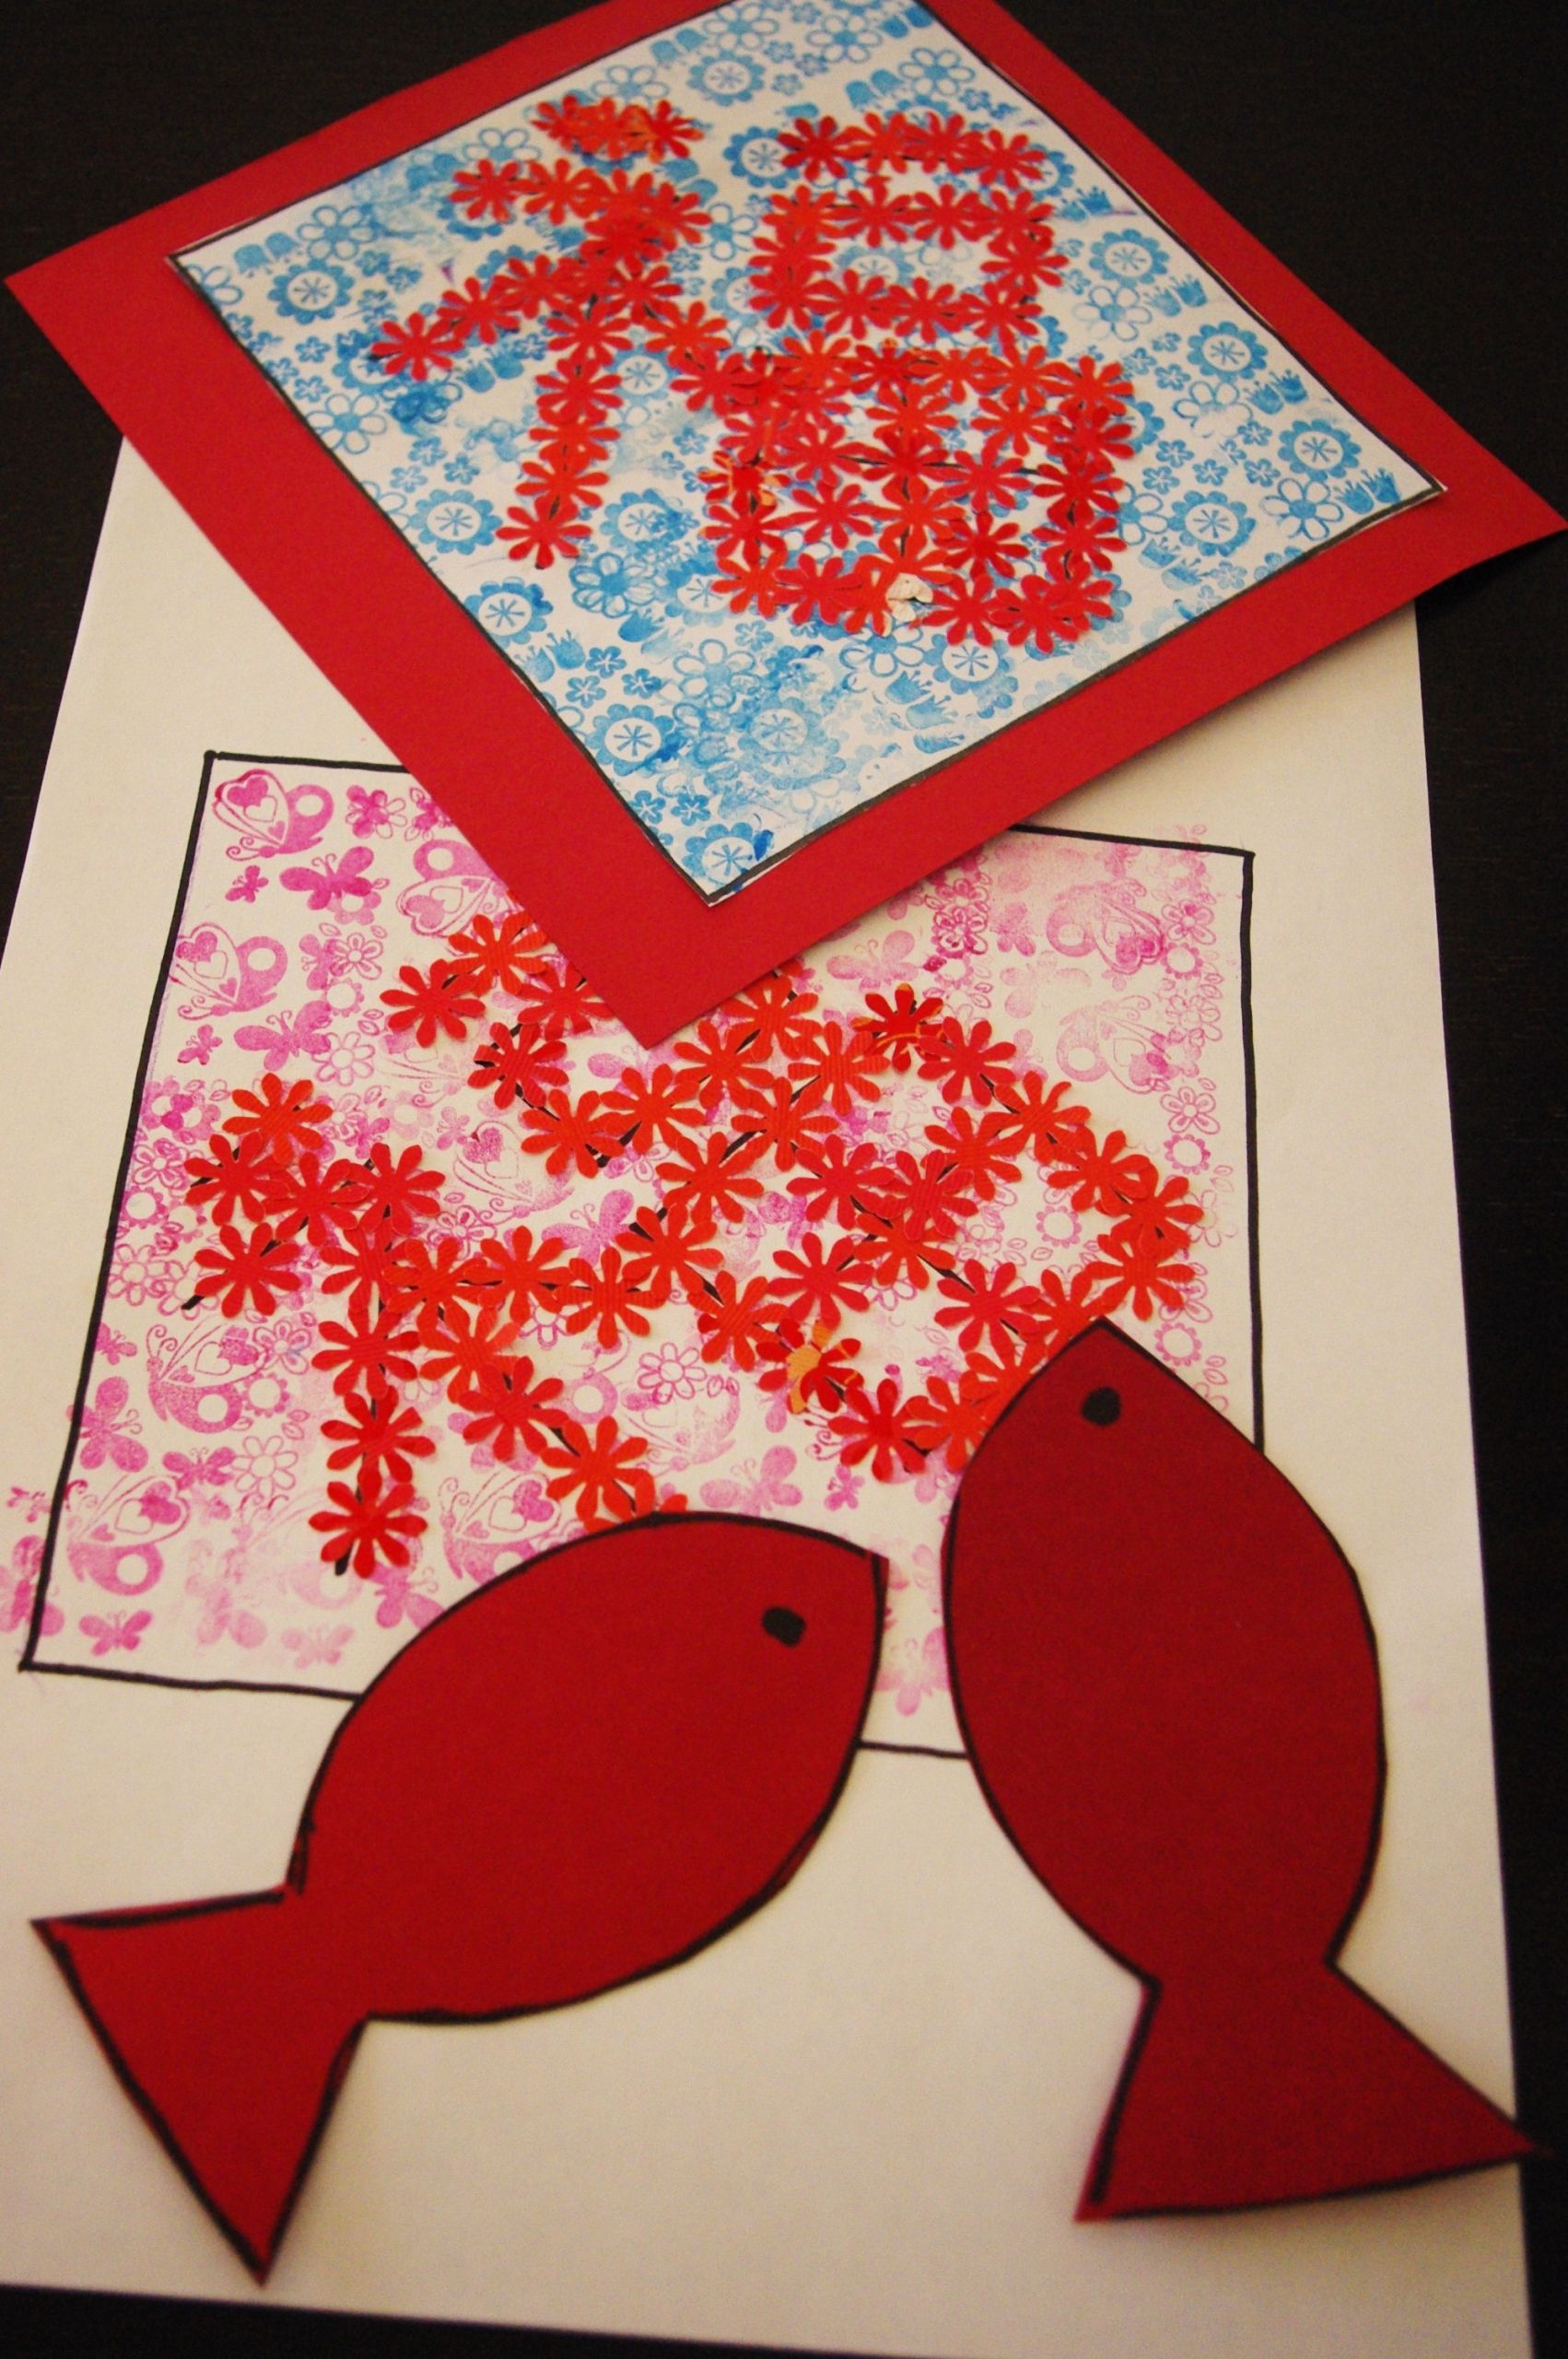 Chinese New Year Art And Craft
 “FU” another chinese new year craft